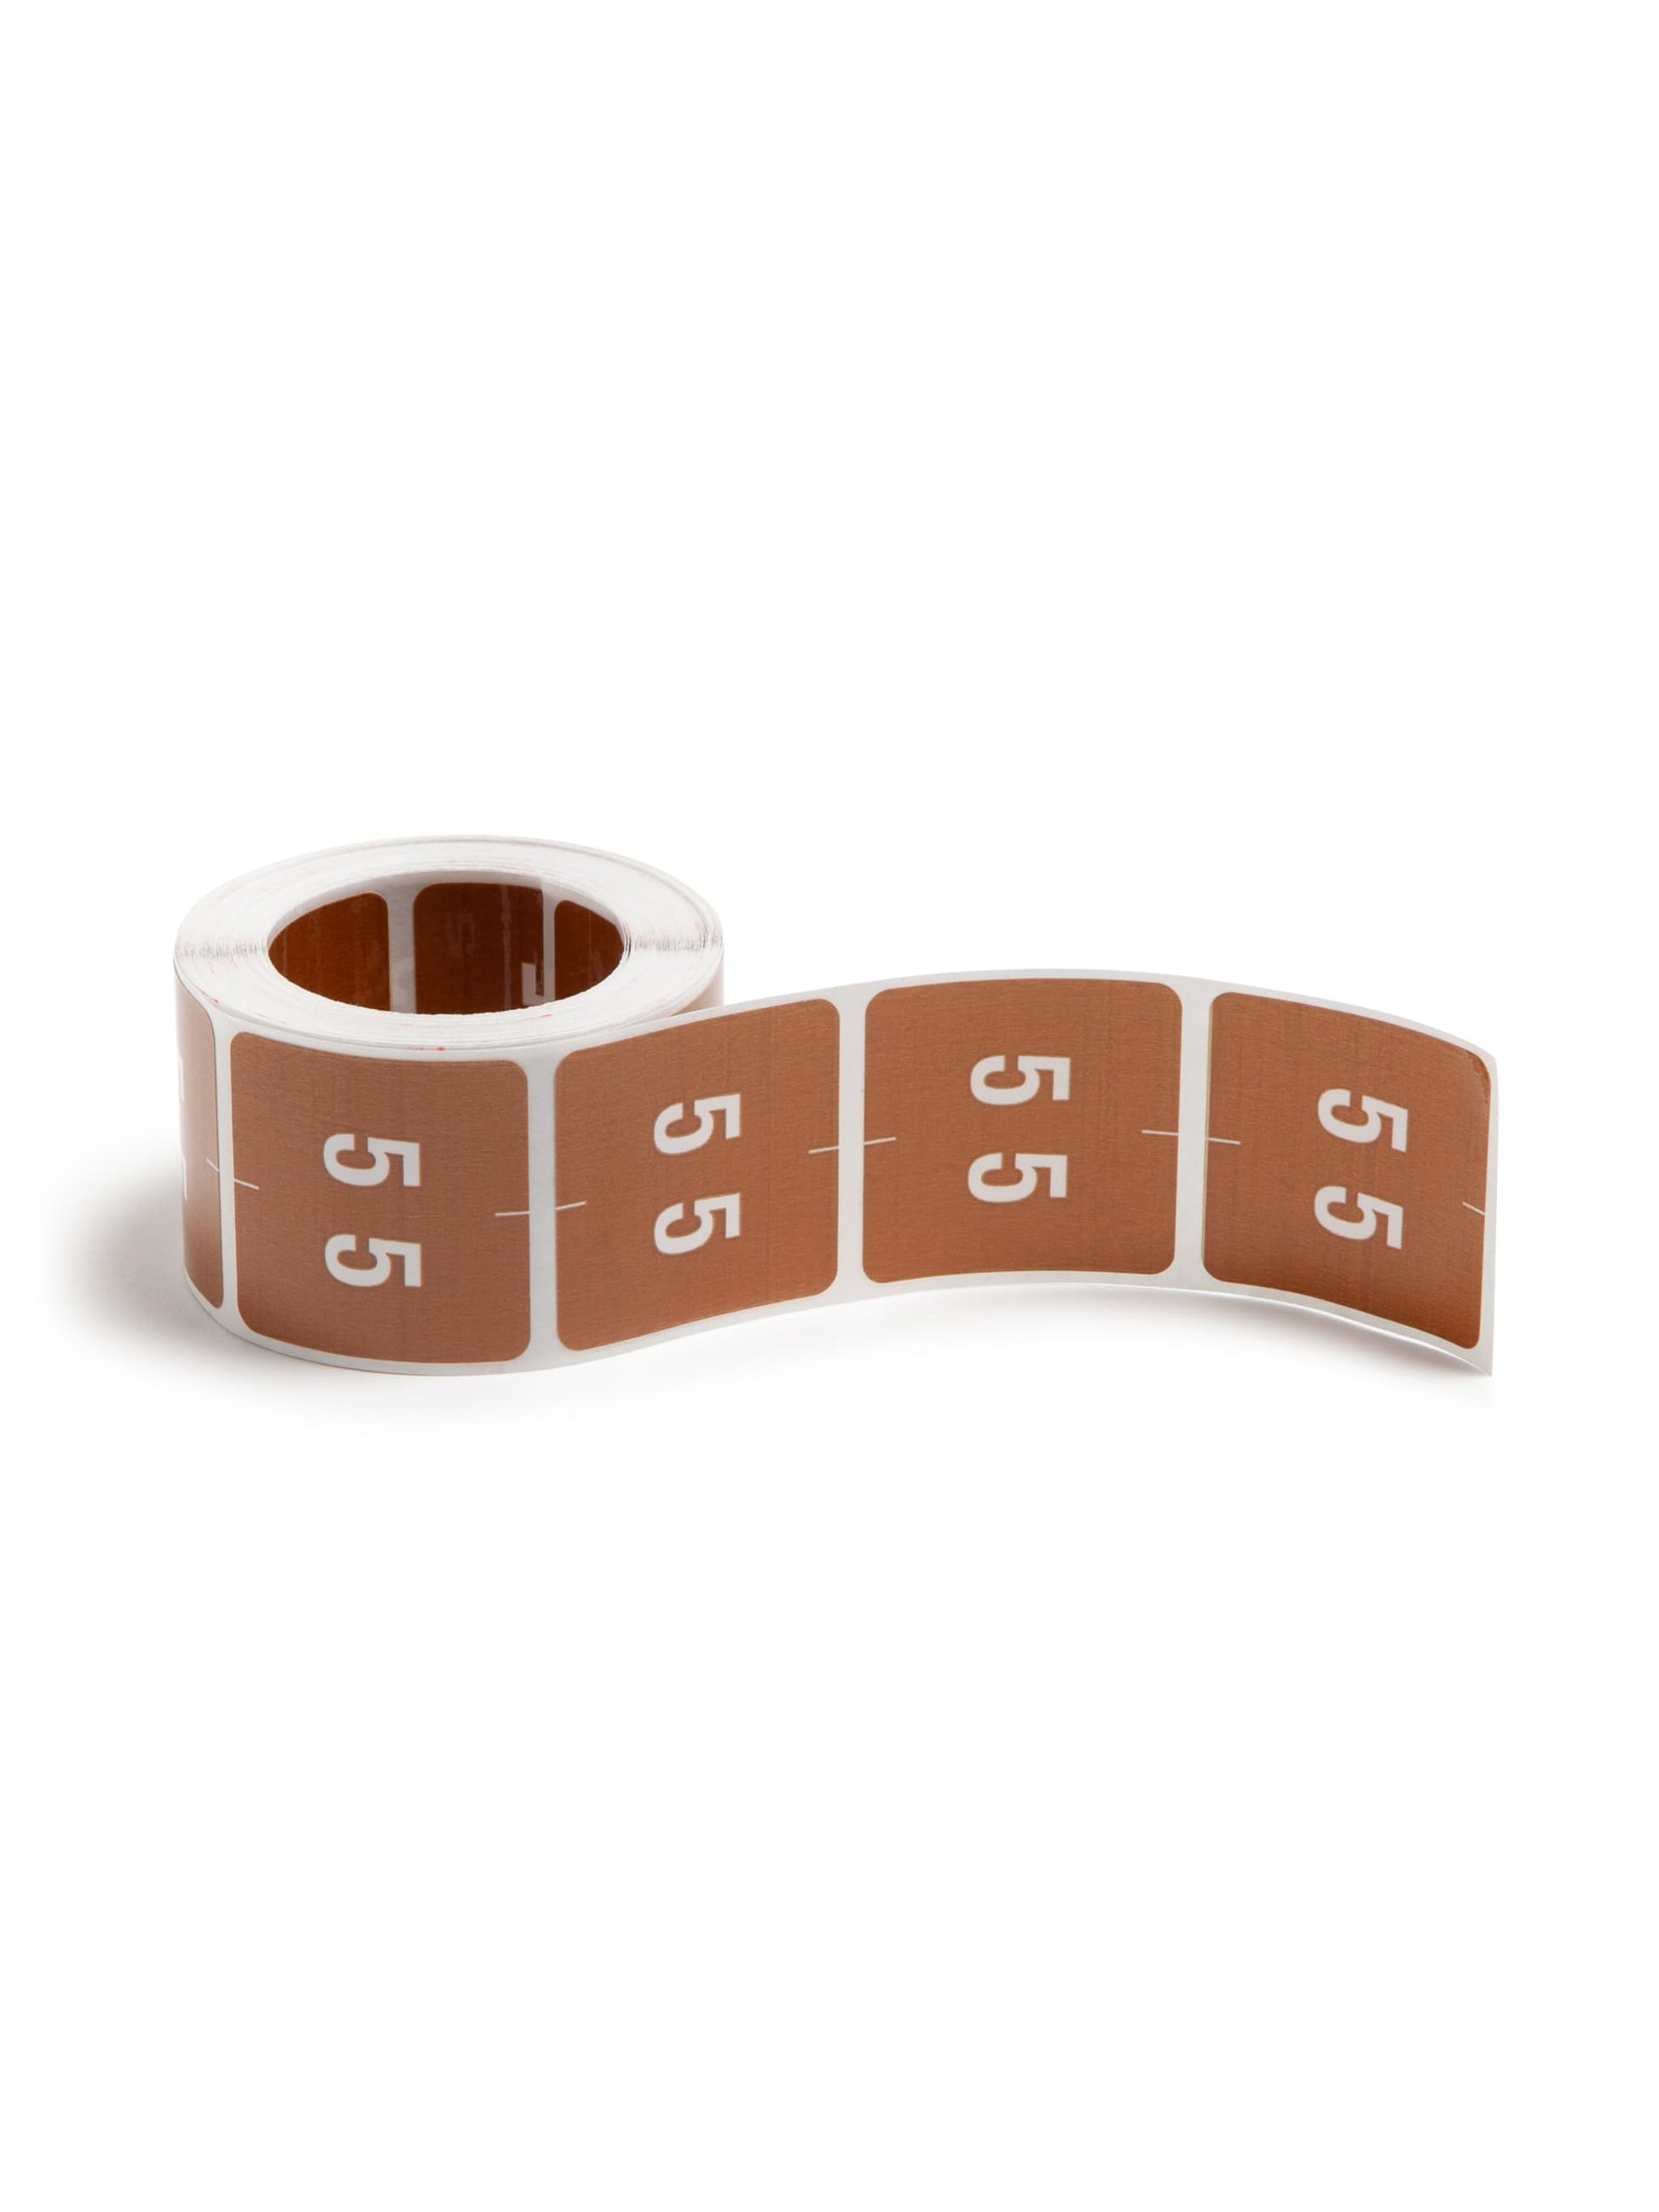 DCC Color-Coded Numeric Labels - Rolls, Brown Color, 1-1/2" X 1-1/2" Size, Set of 1, 086486674256